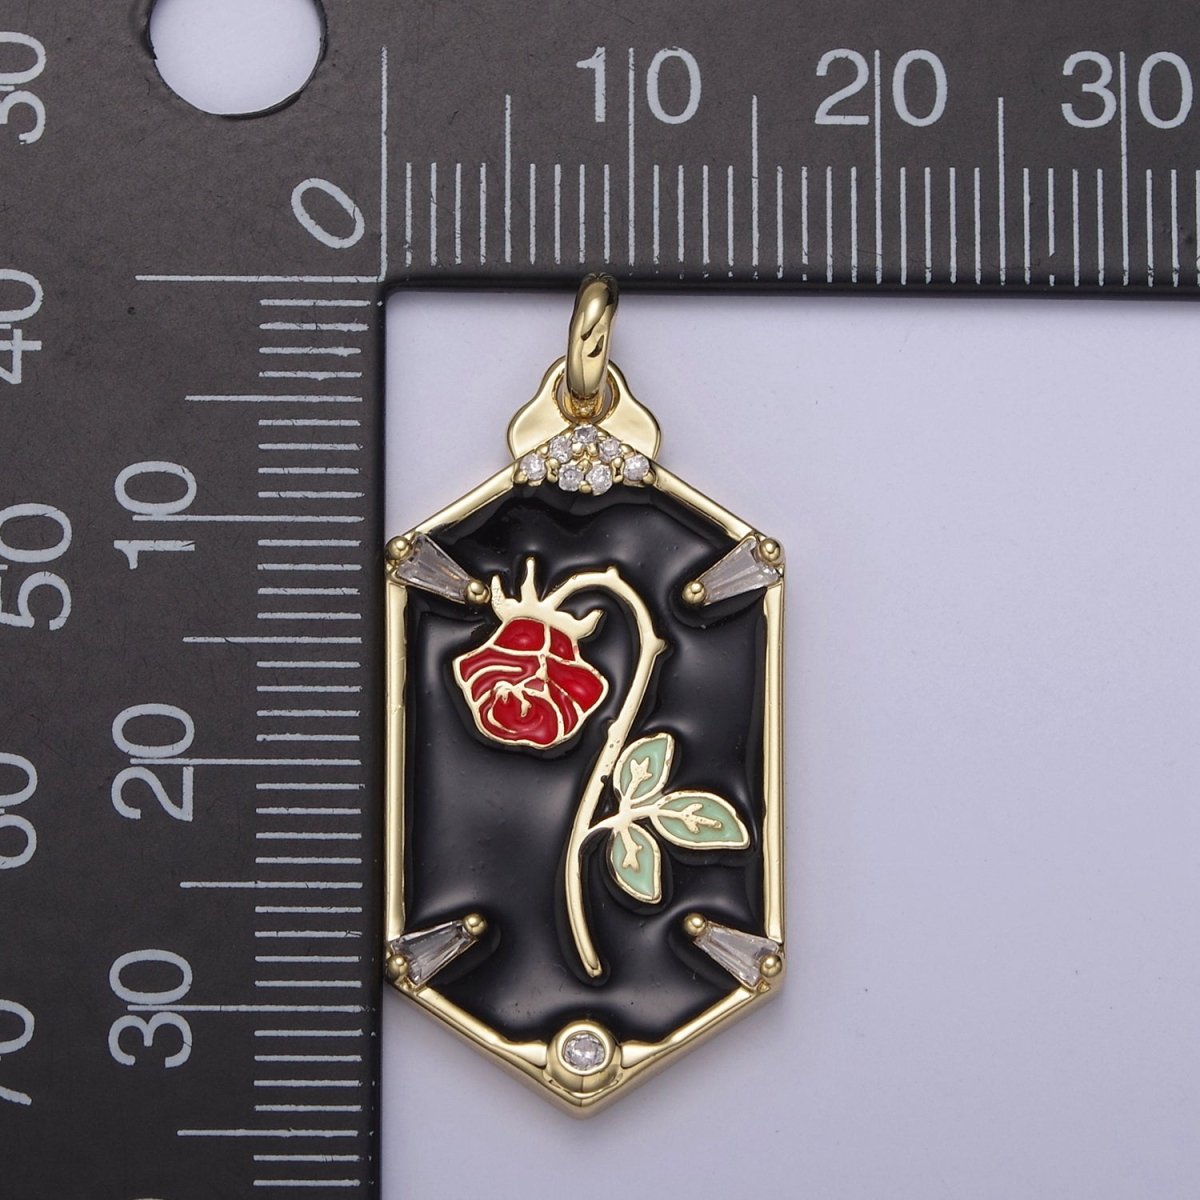 Dainty Red Rose Charm Necklace, 14K Gold Filled Flower necklace Pendant Belle beauty and the beast Jewelry Inspired Hexagon Tag Dangle Charm N-759 N-761 - DLUXCA